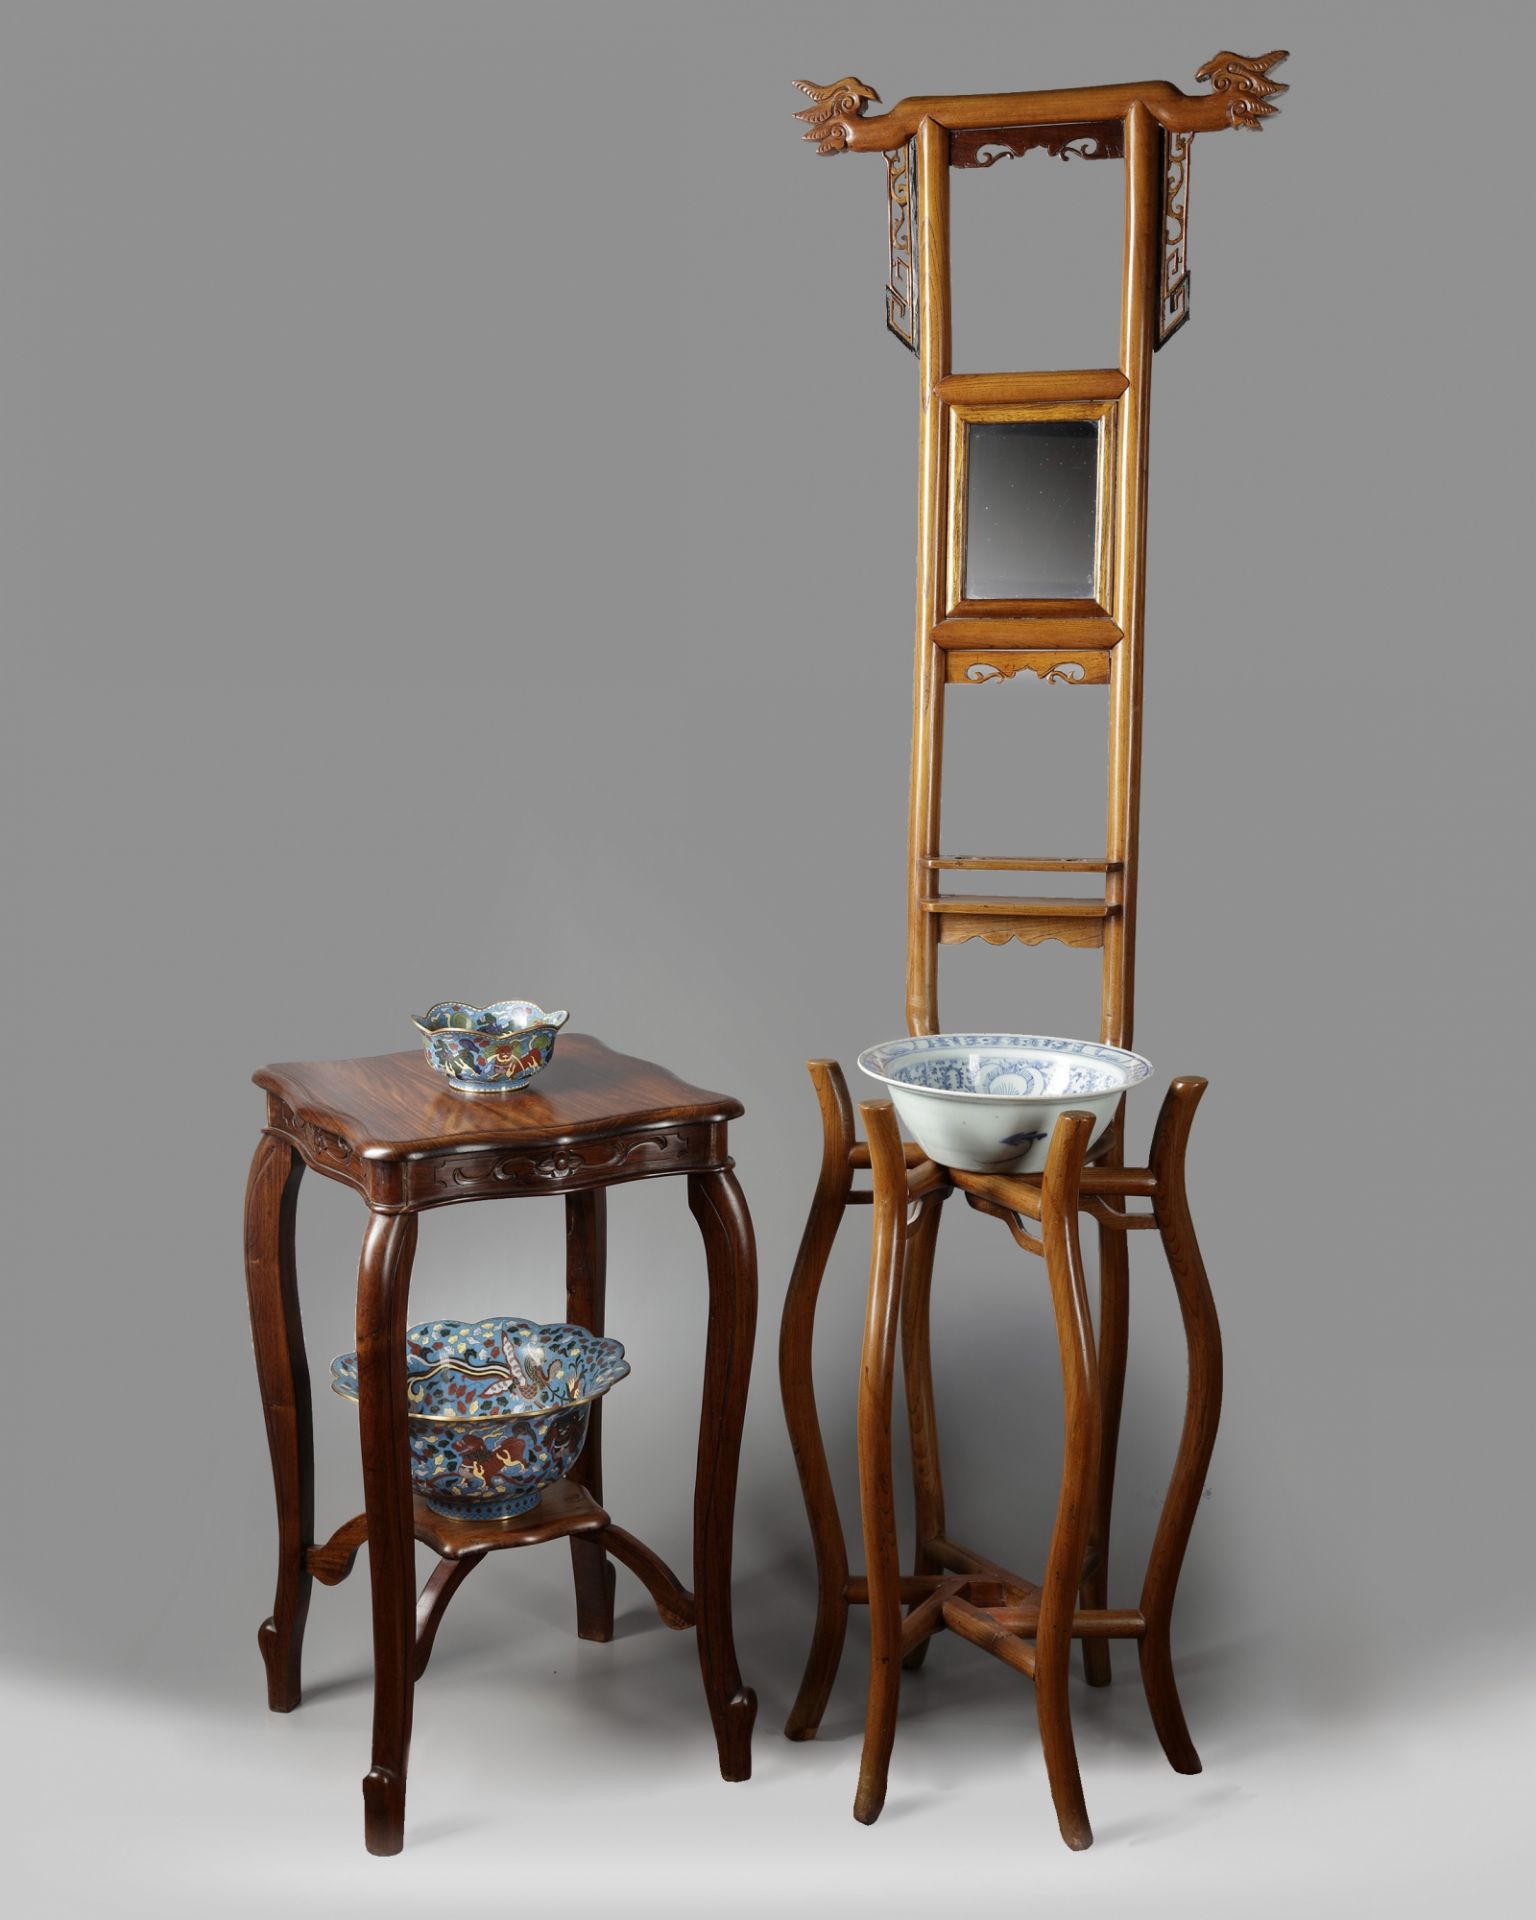 A Chinese hardwood mirror washstand with a basin and a hardwood stand